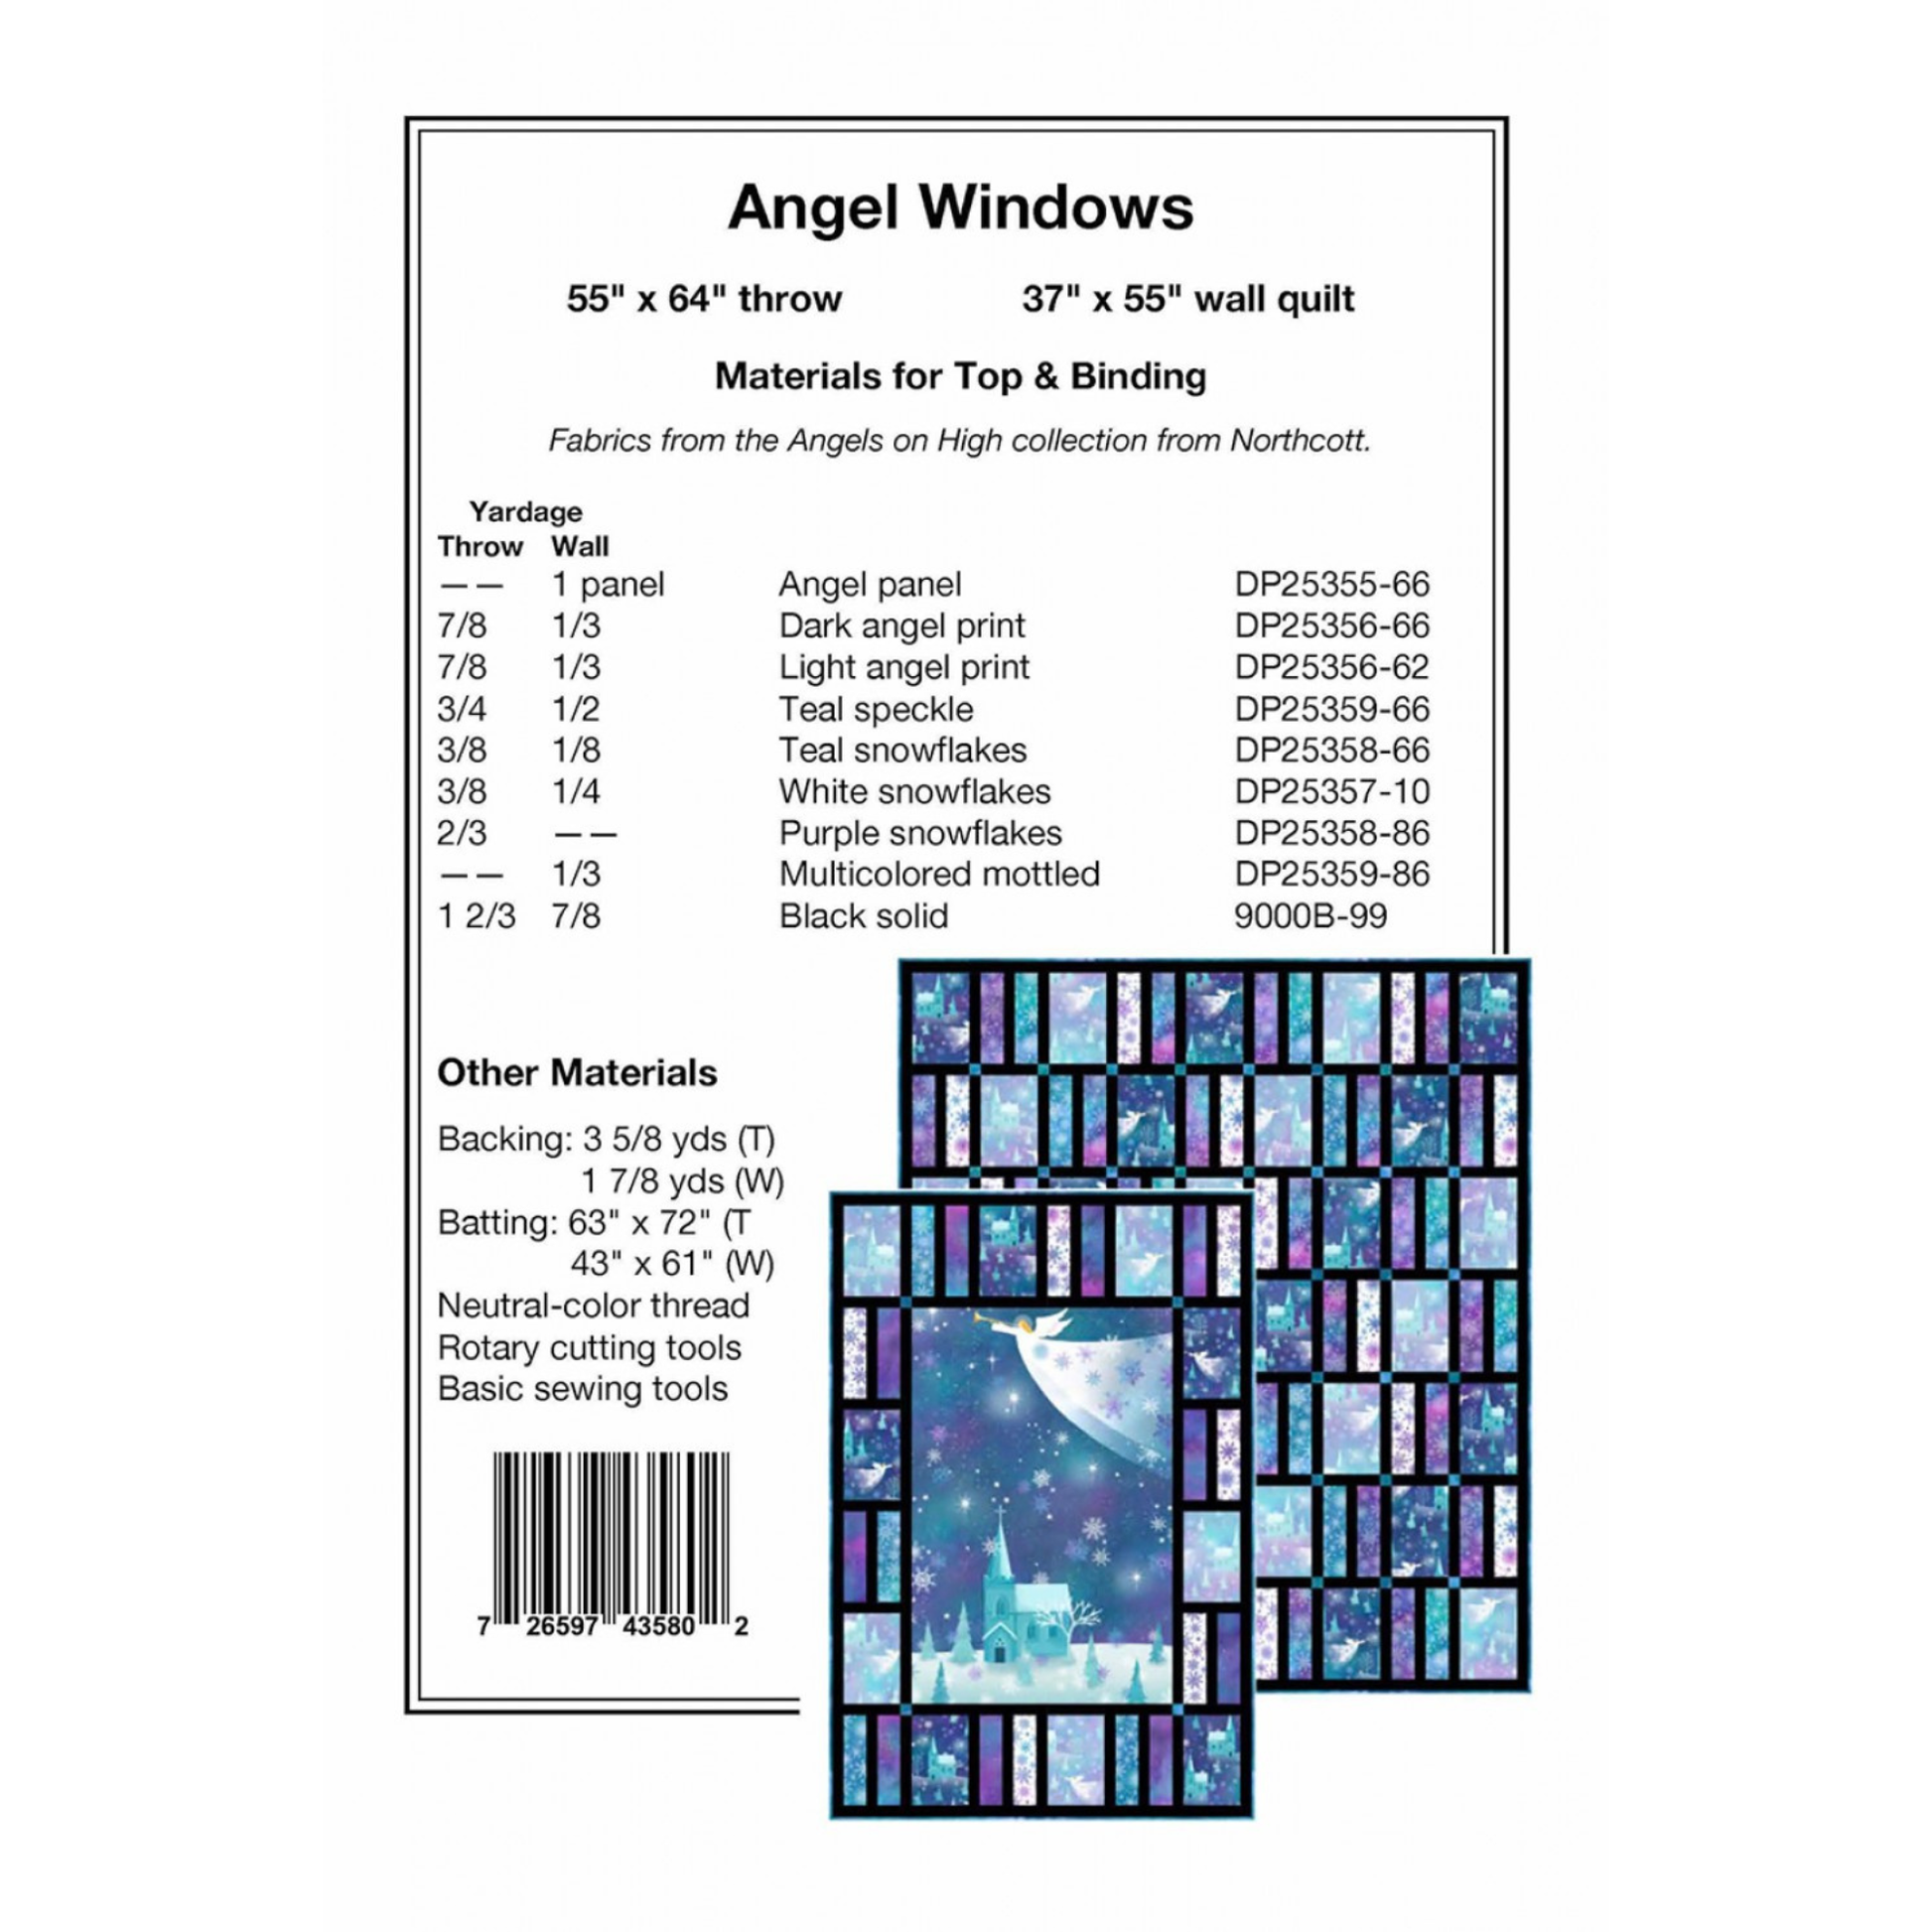 Northcott Fabrics Quilt Kit Angel Windows QUILT KIT Throw Size 55" x 64" with Angels On High Cotton Fabric